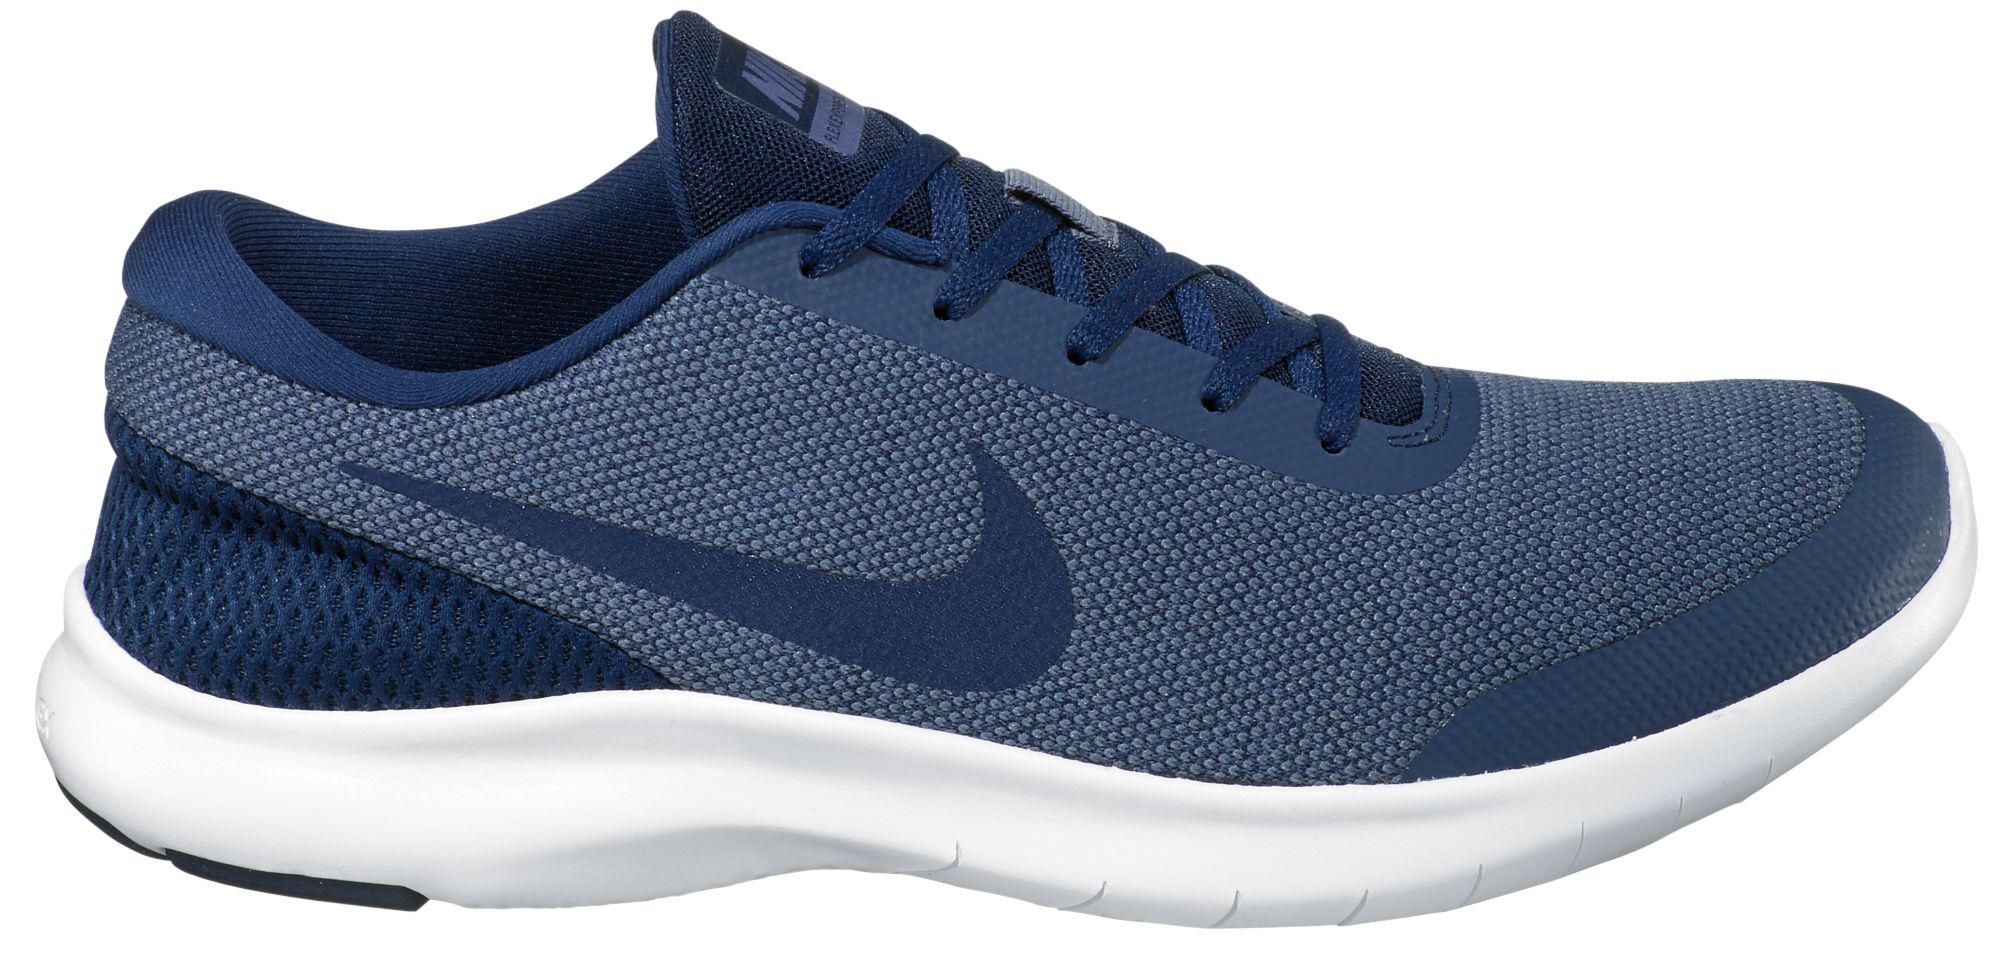 nike flex experience rn 7 blue running shoes